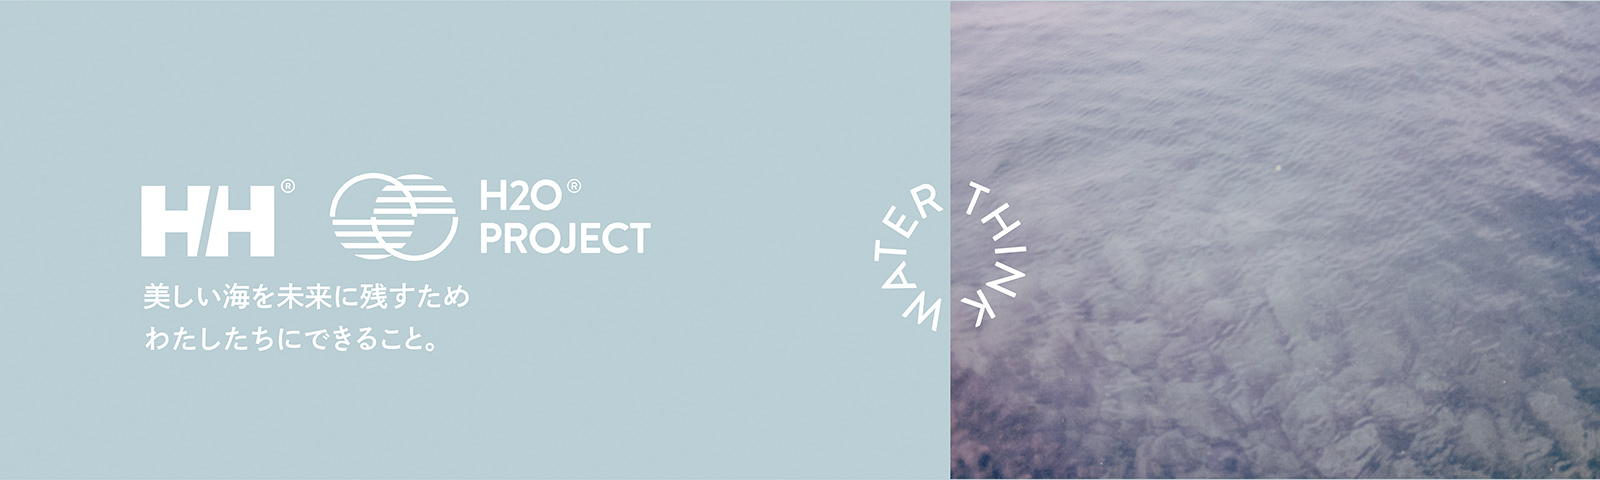 H2O® PROJECT